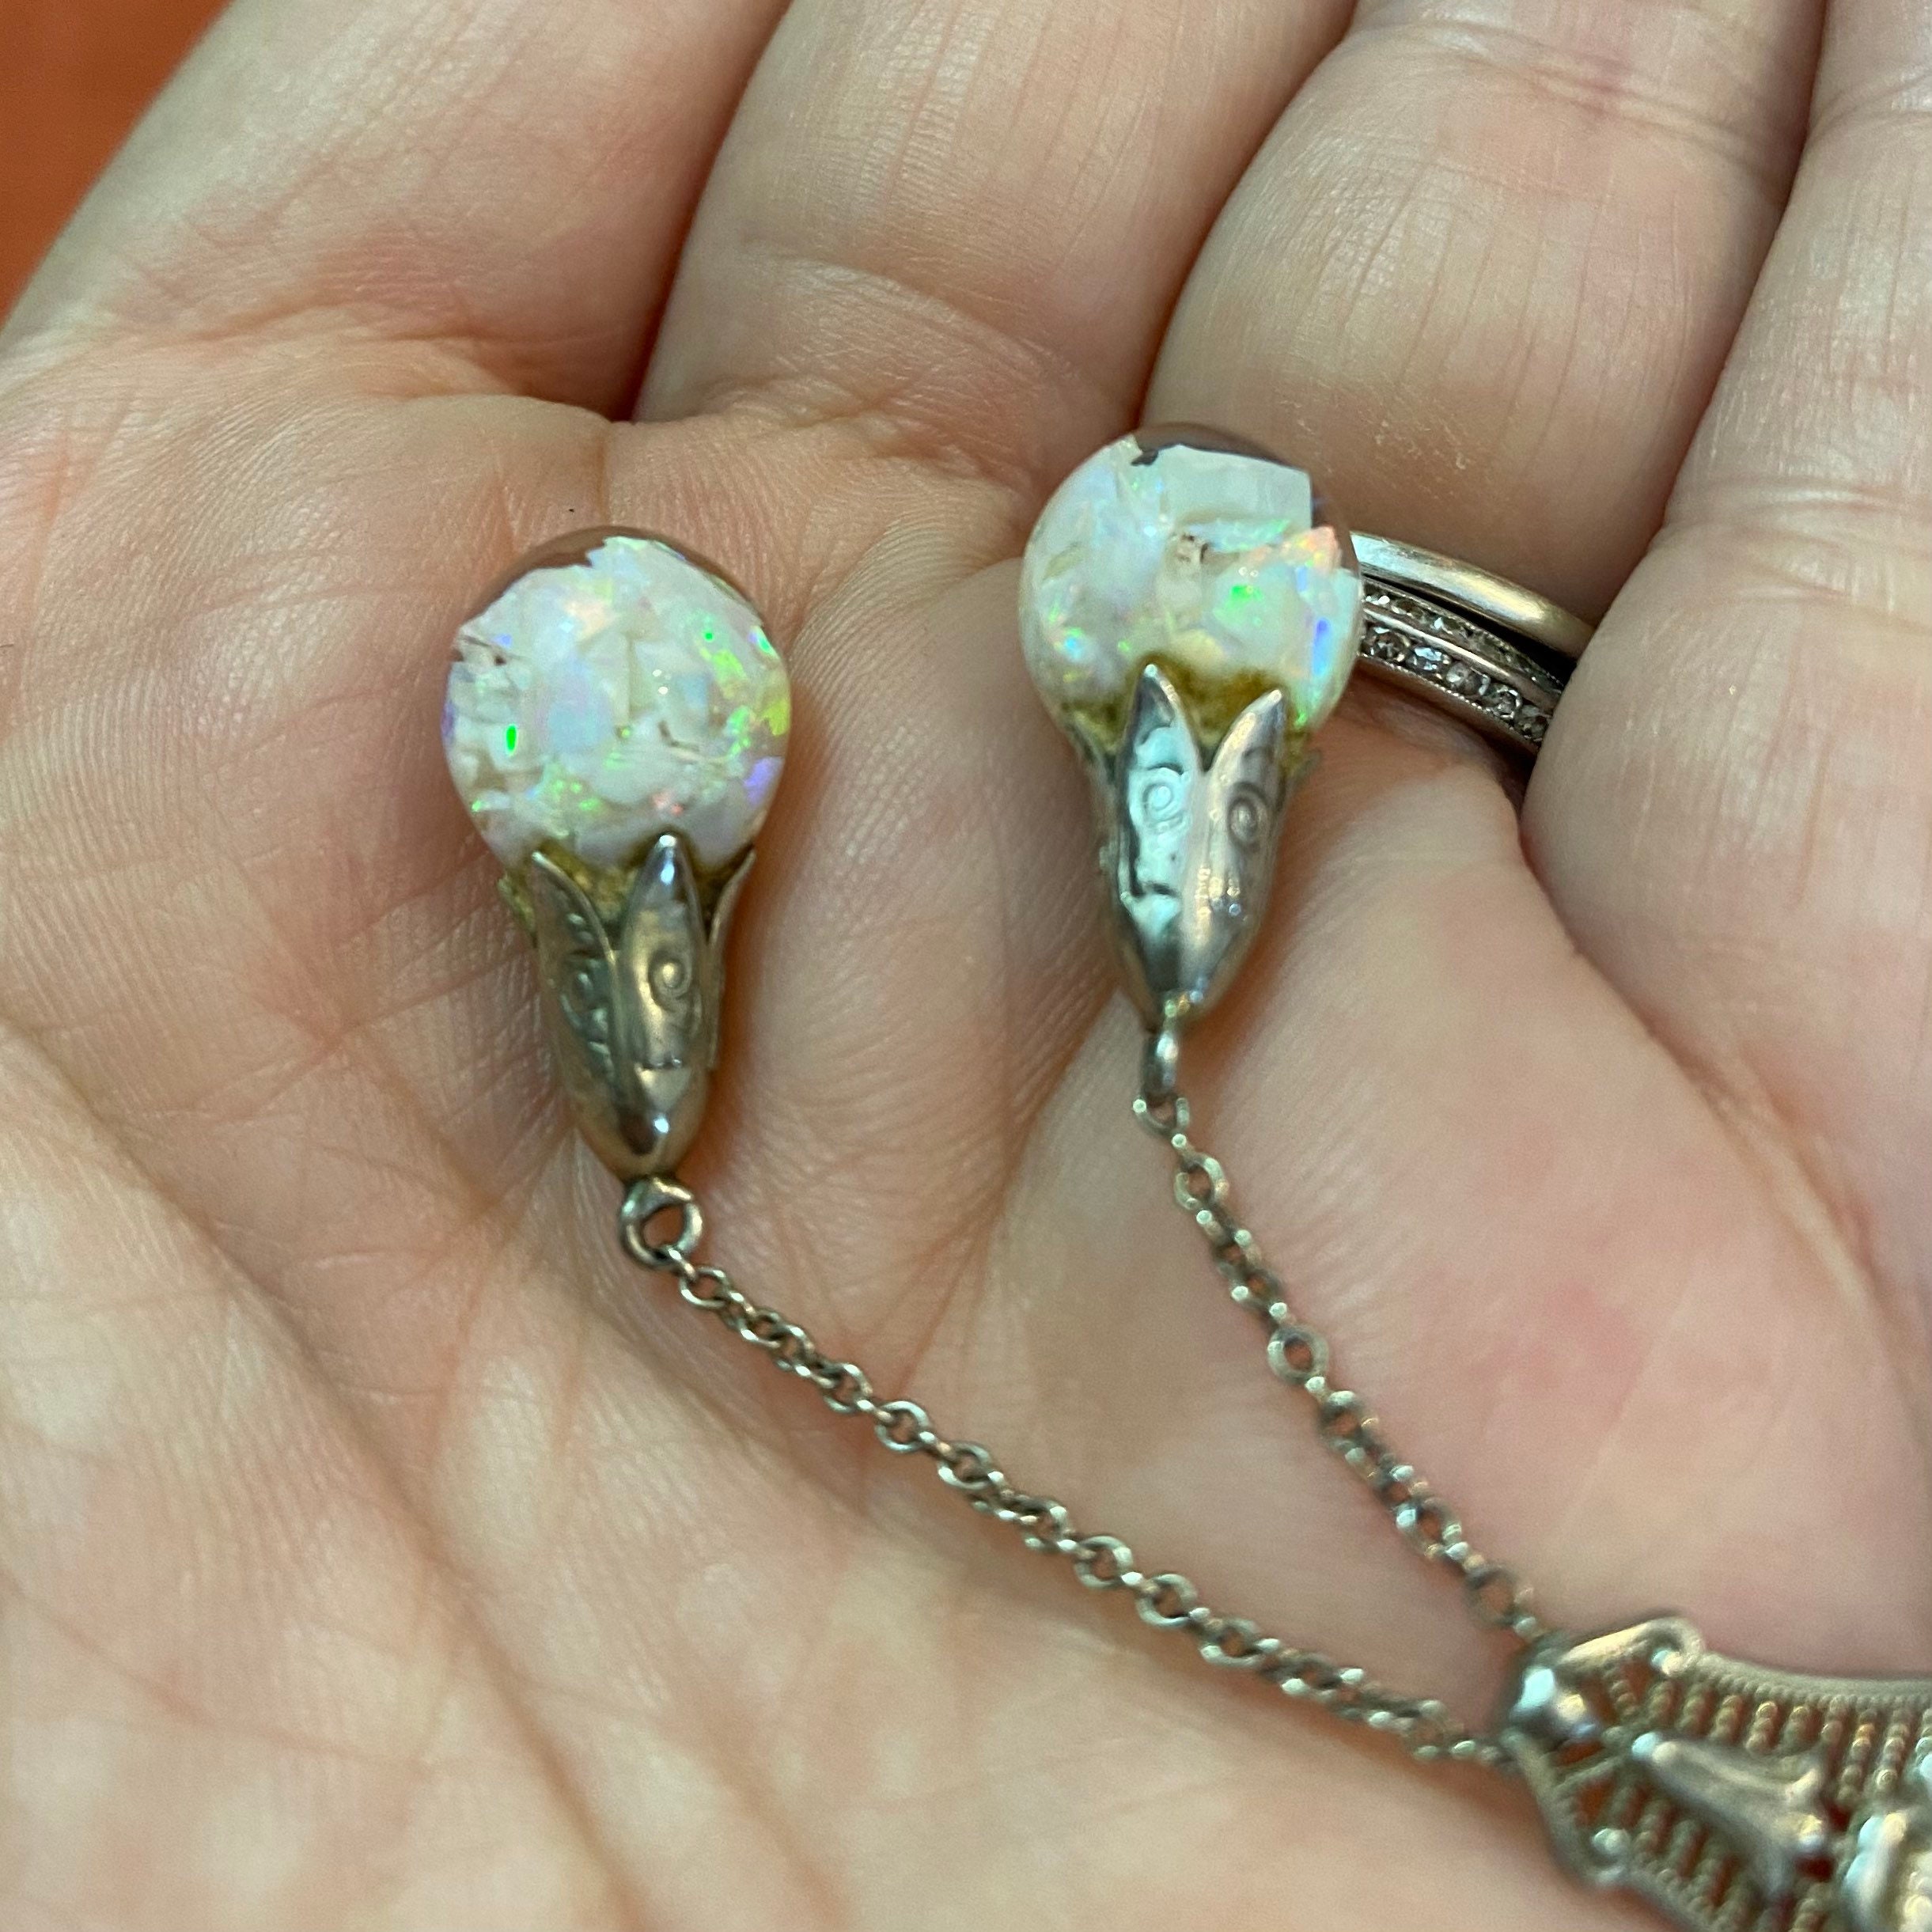 Rare Horace Welch 14k Gold Lariat Double Floating Opal Necklace - Etsy